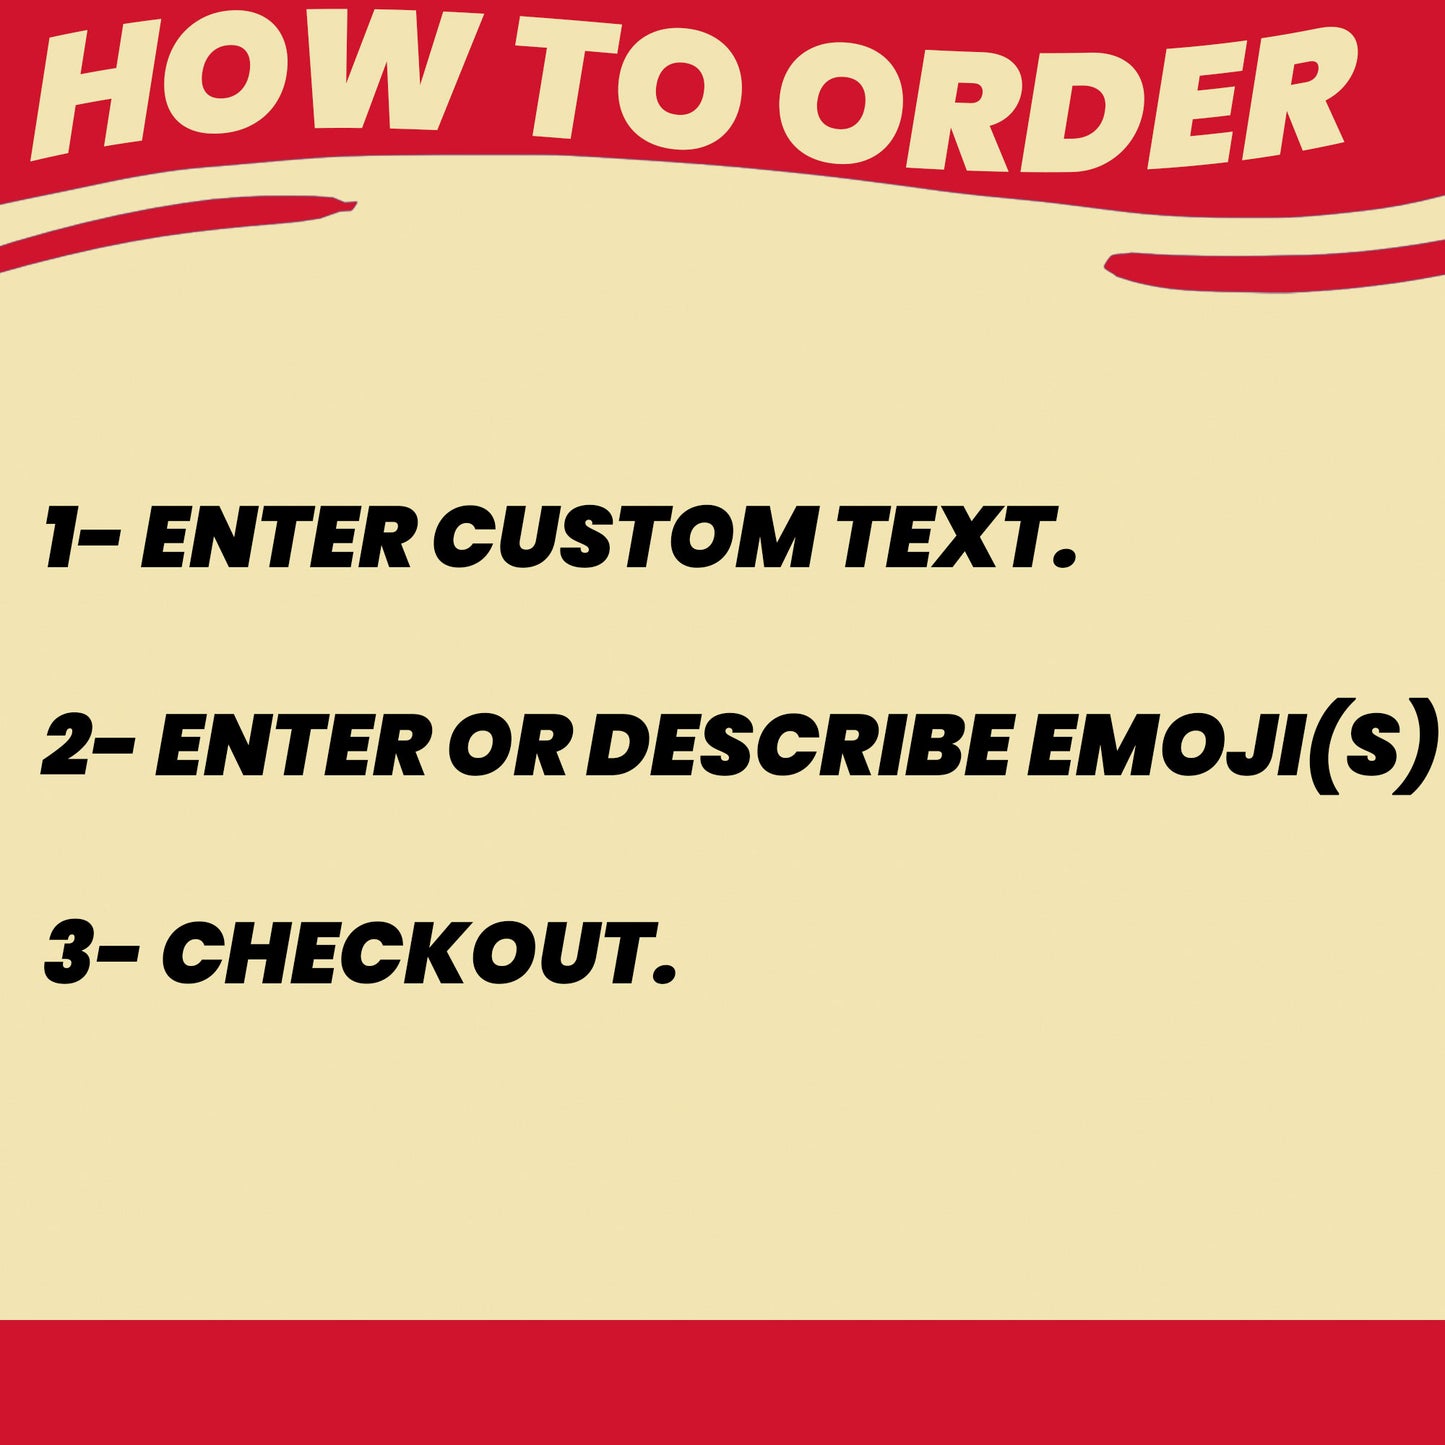 custom tshirt with emoji order in 3 easy steps. Enter text, enter emoji, choose size and checkout